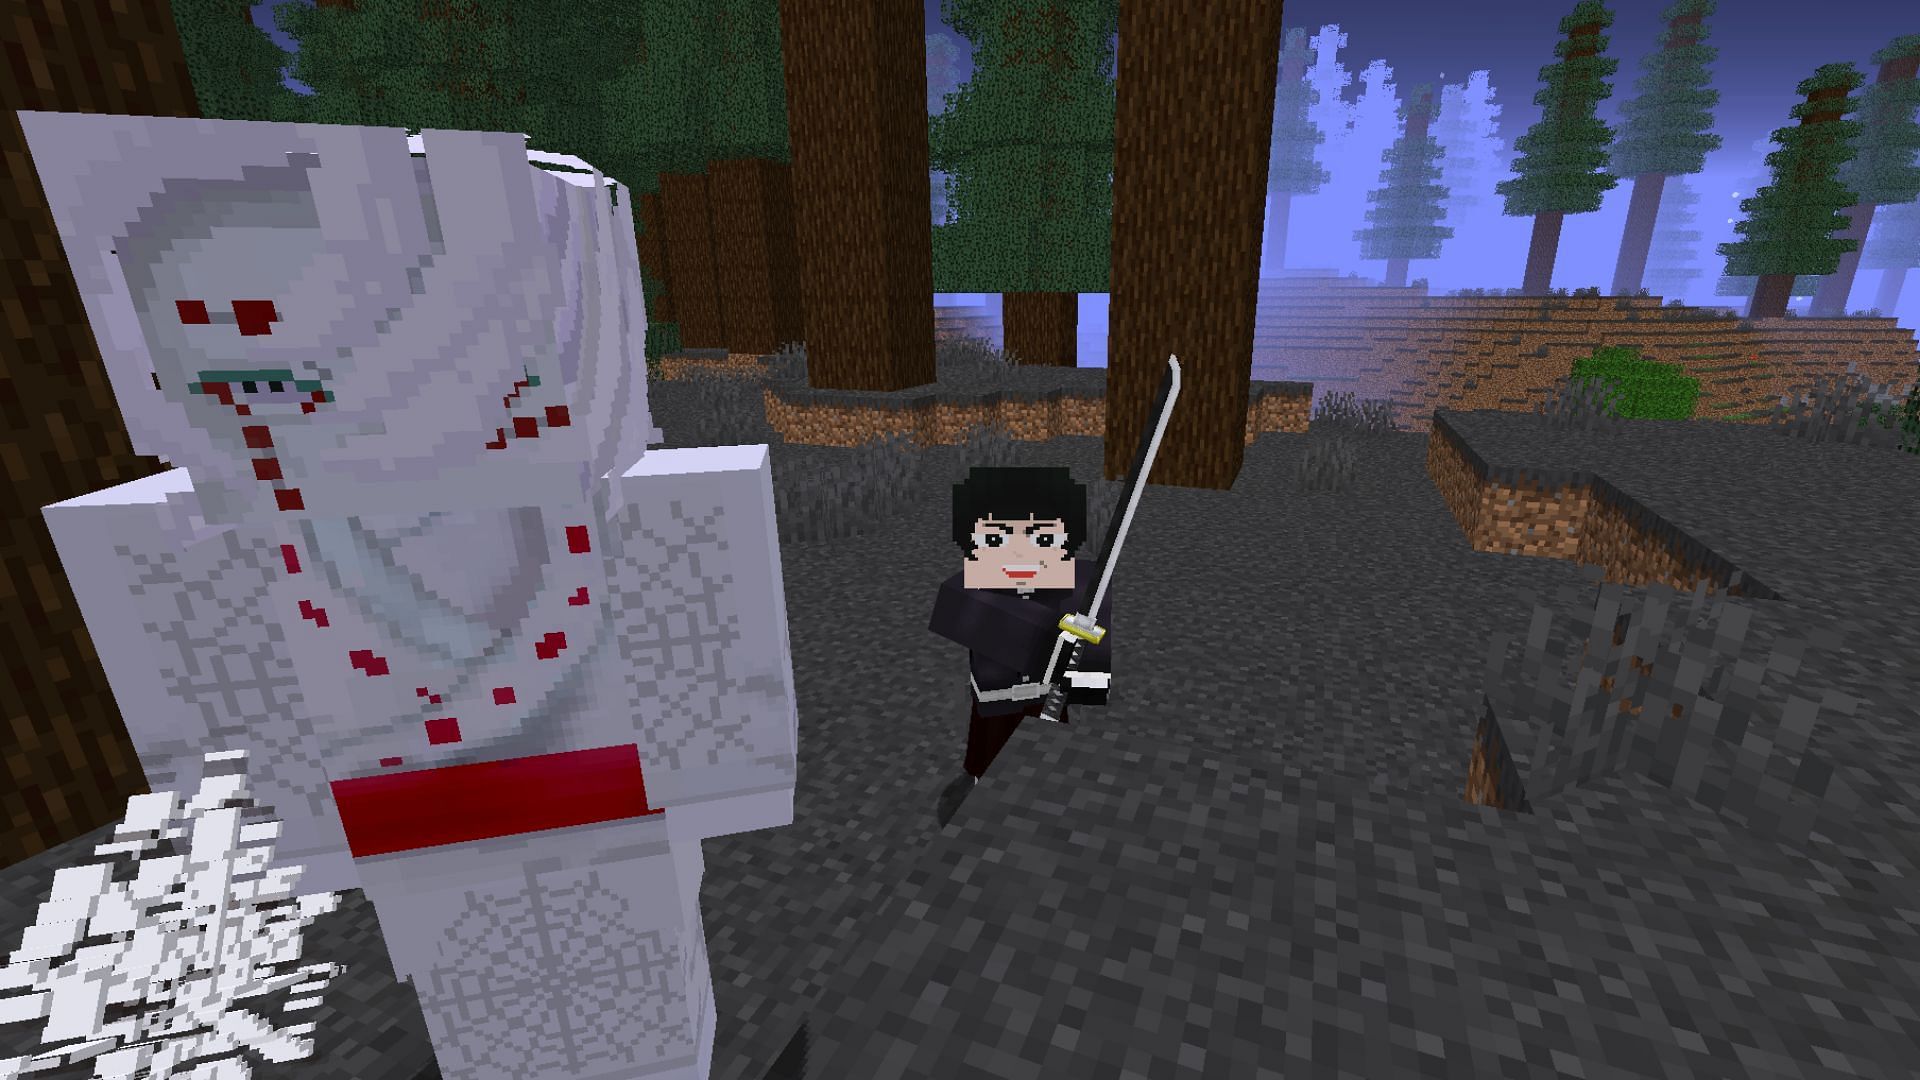 Slayers unleashed roblox account with many game progresses (needs